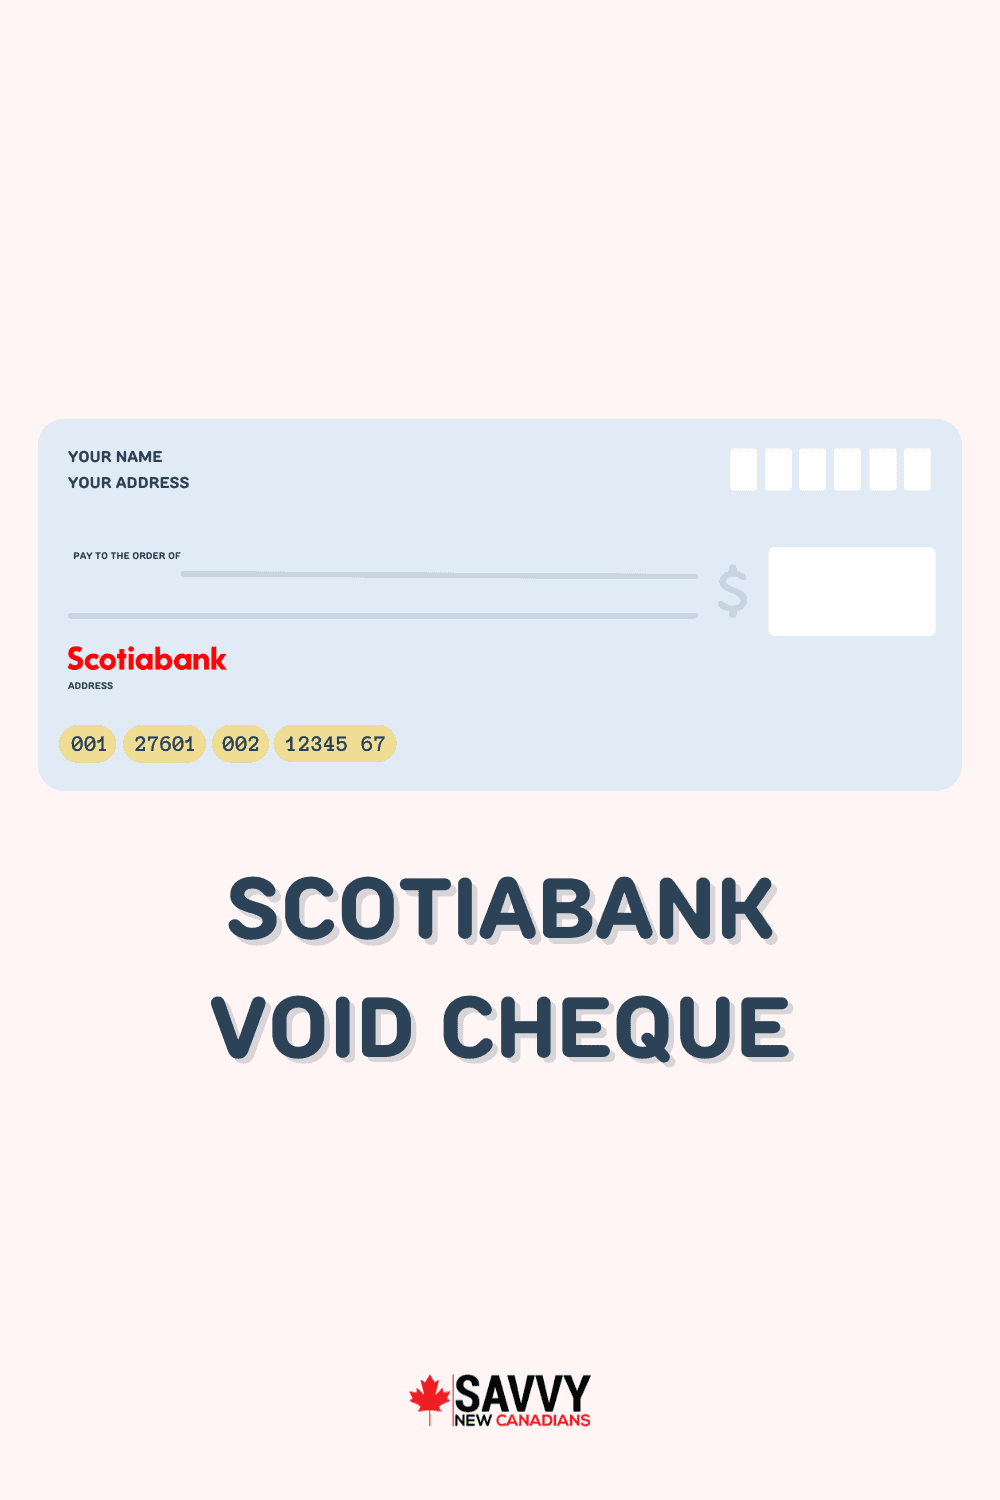 Can I Get One Cheque From Scotiabank